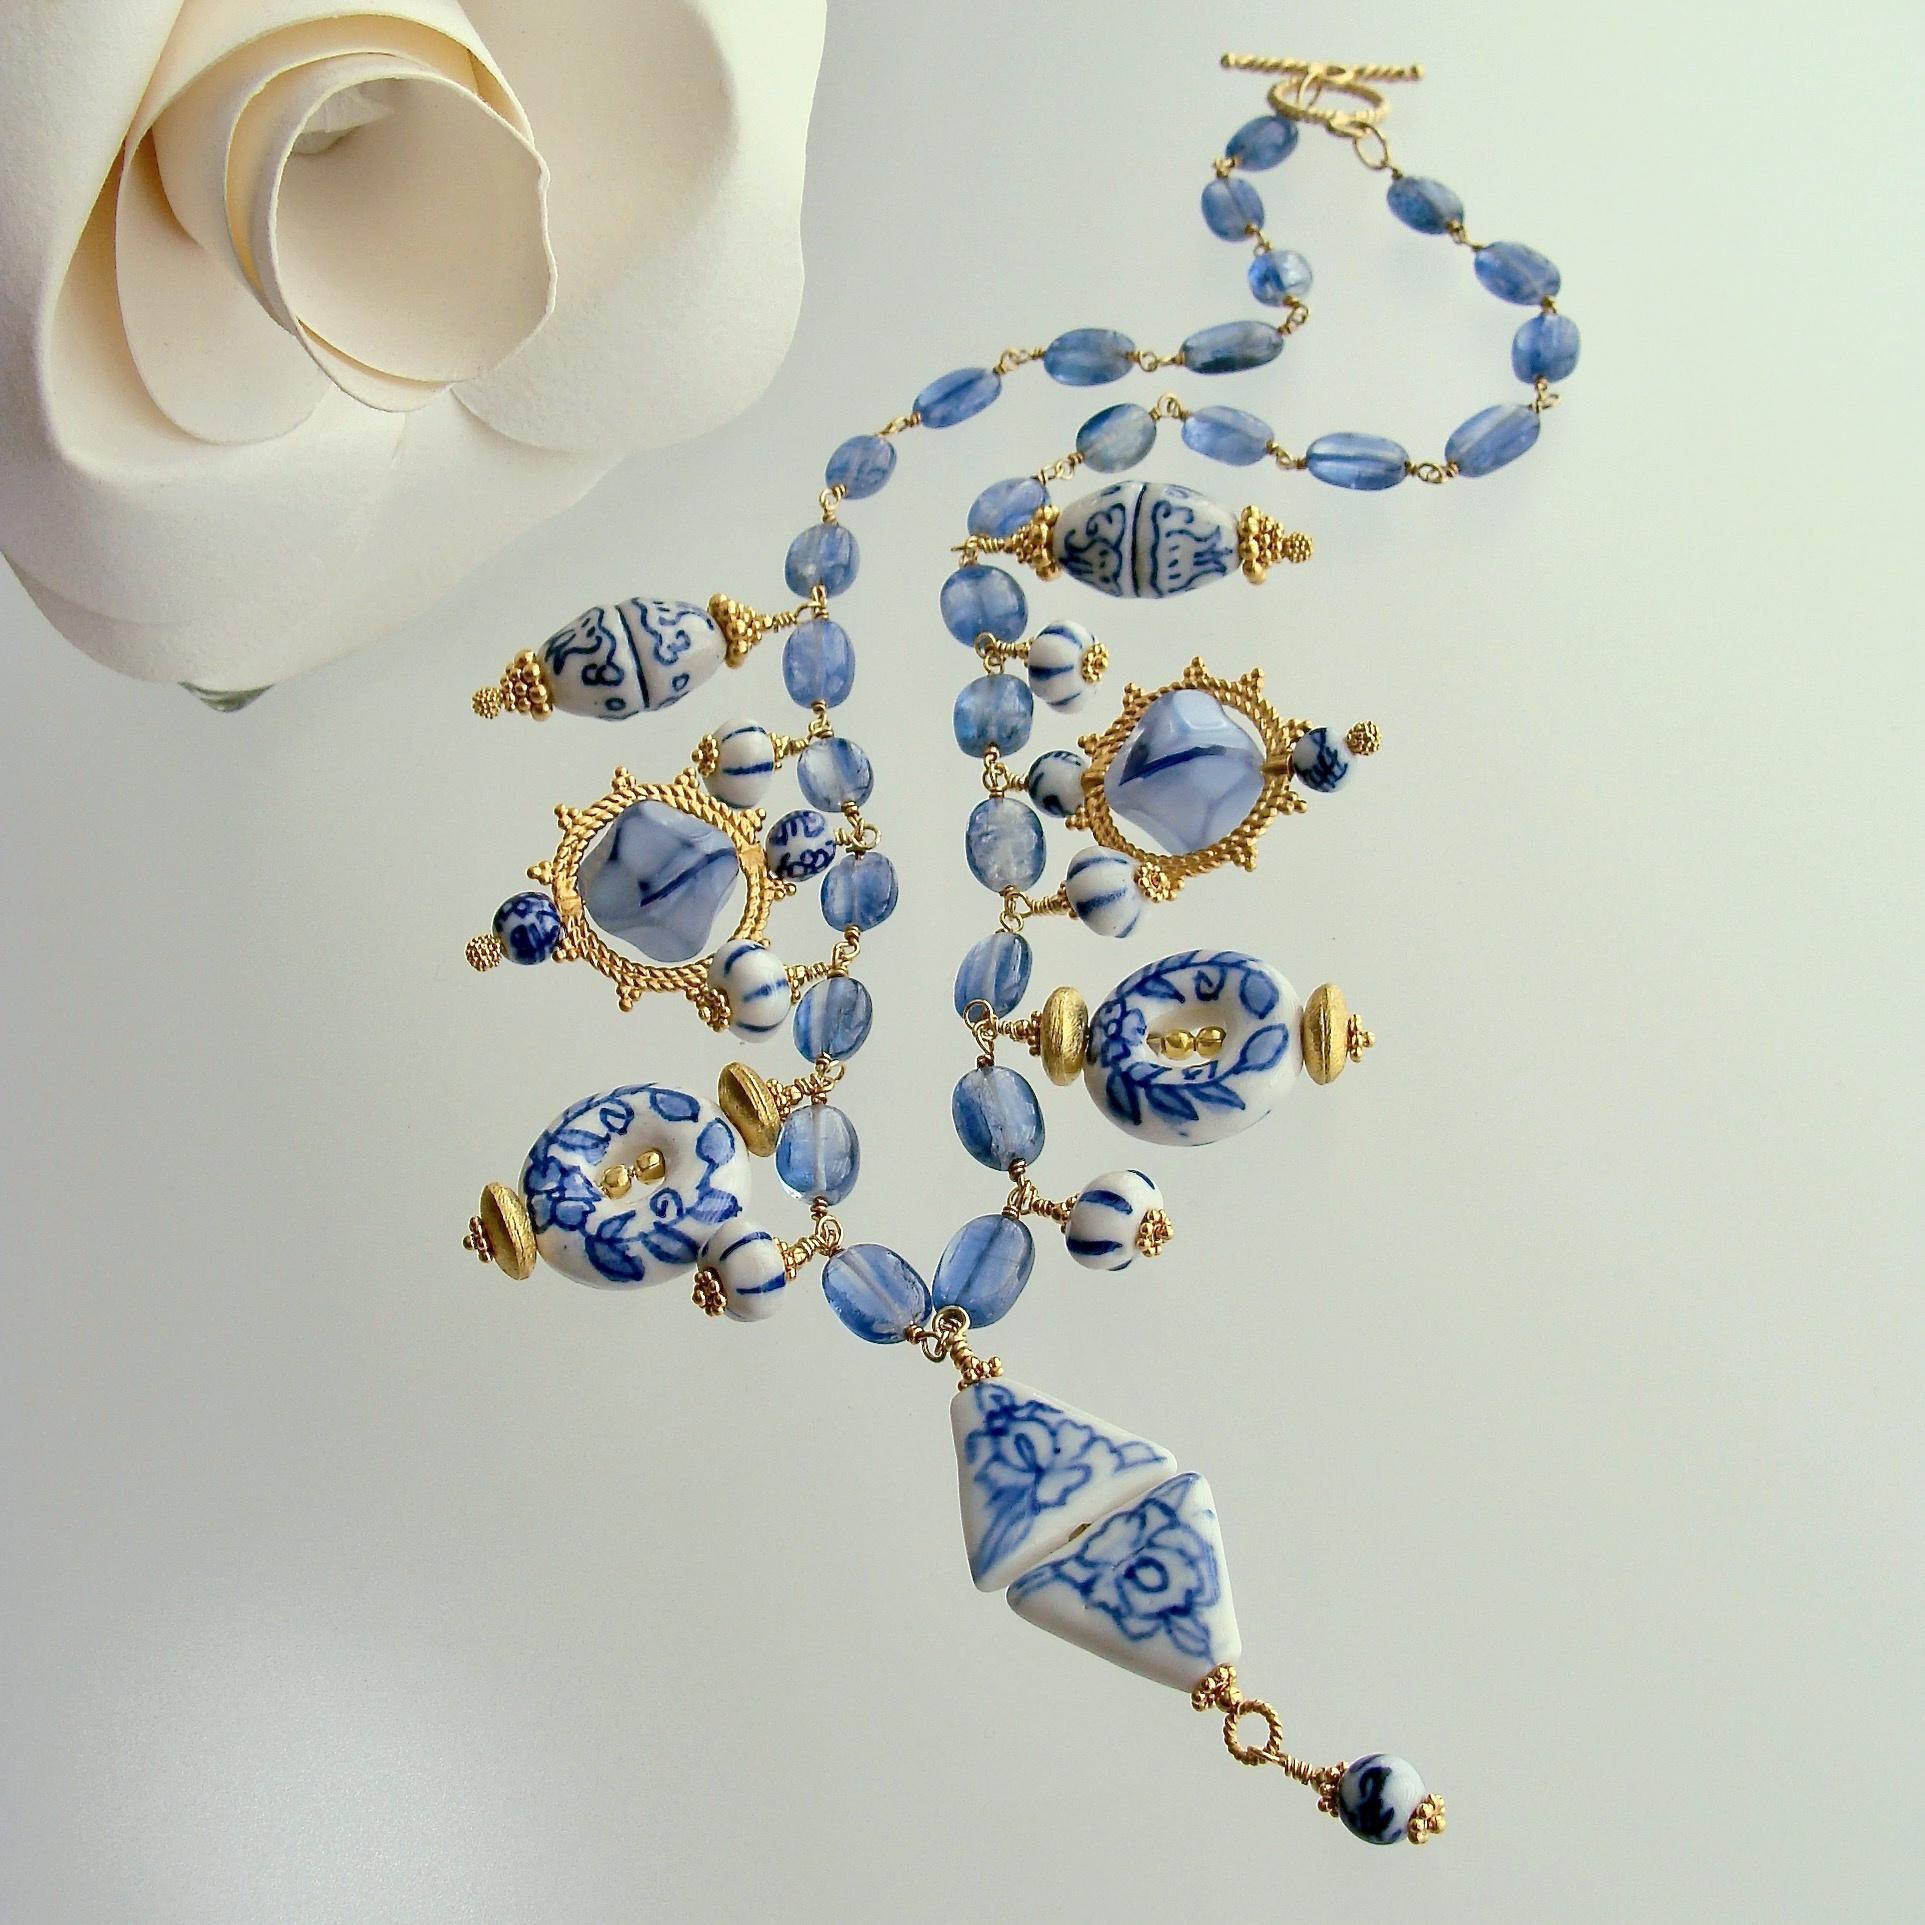 Blue and white themes are universally popular whether in interior design or jewelry.  Such is the case with this whimsical and charming kyanite blue necklace.  Various shades and sizes of blue and white Chinese porcelain beads are accented with